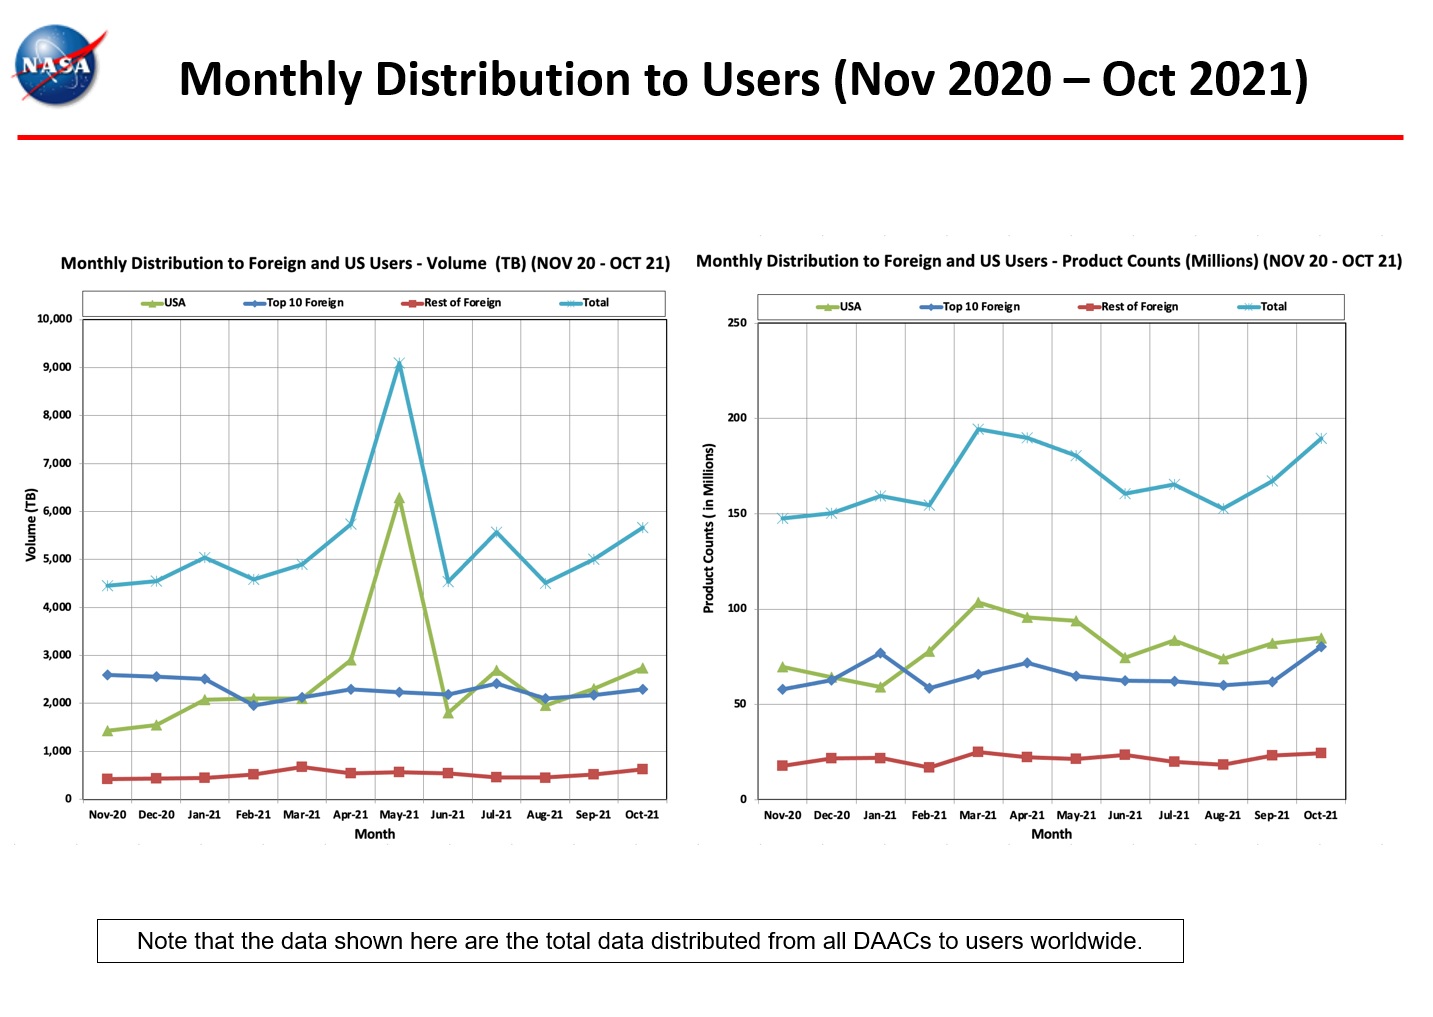 Monthly distribution to users, Nov 2020-Oct 2021